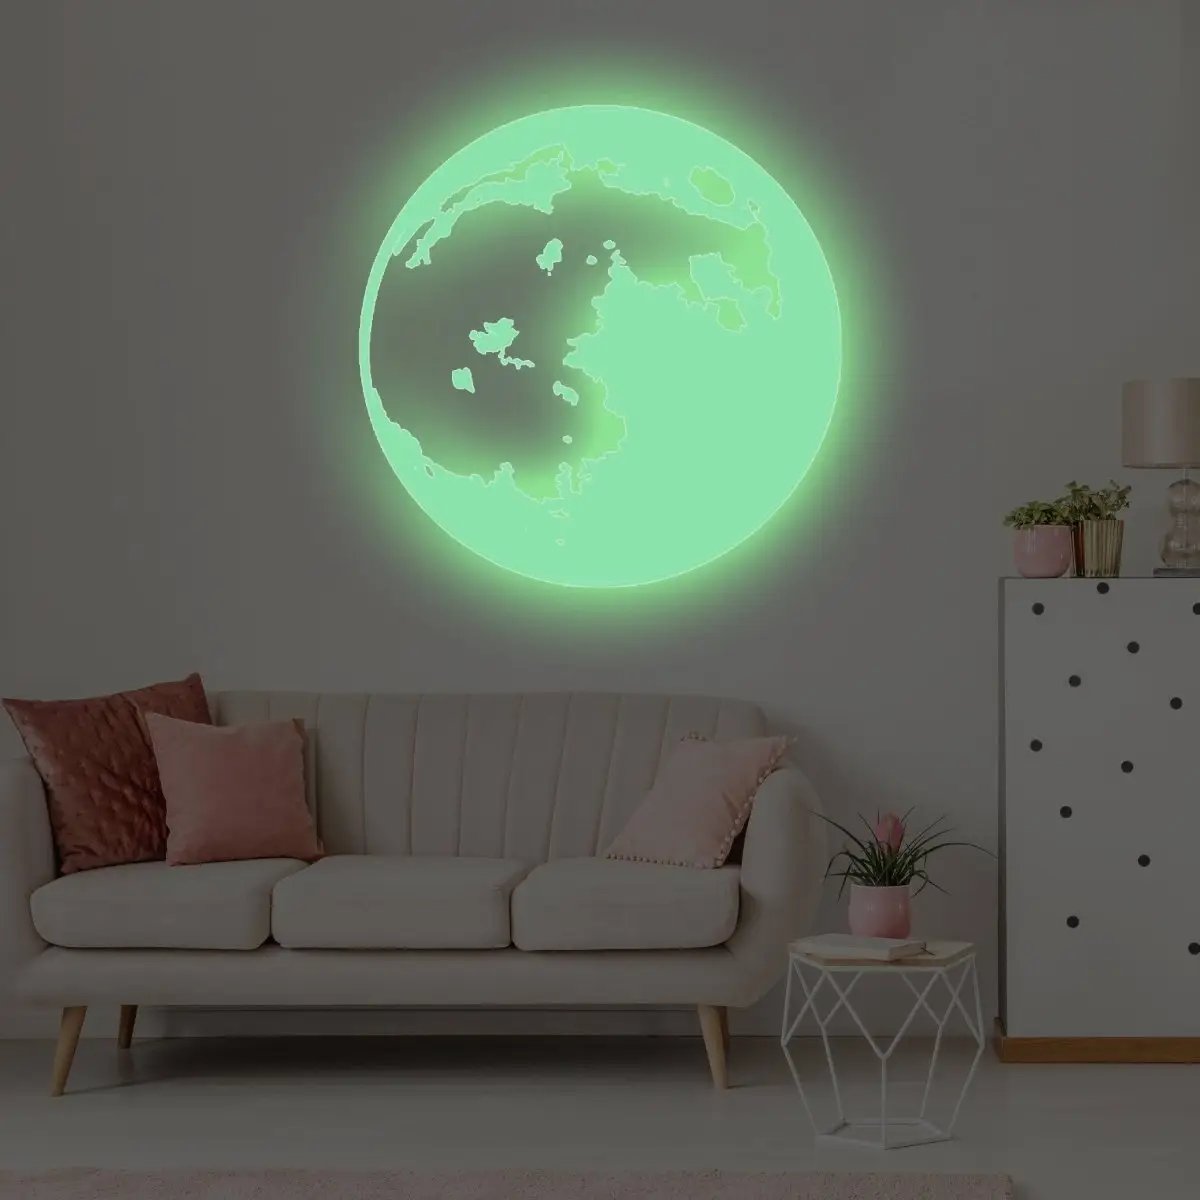 Celestial Glow: 3D Moon and Star Wall Sticker Set - Decords